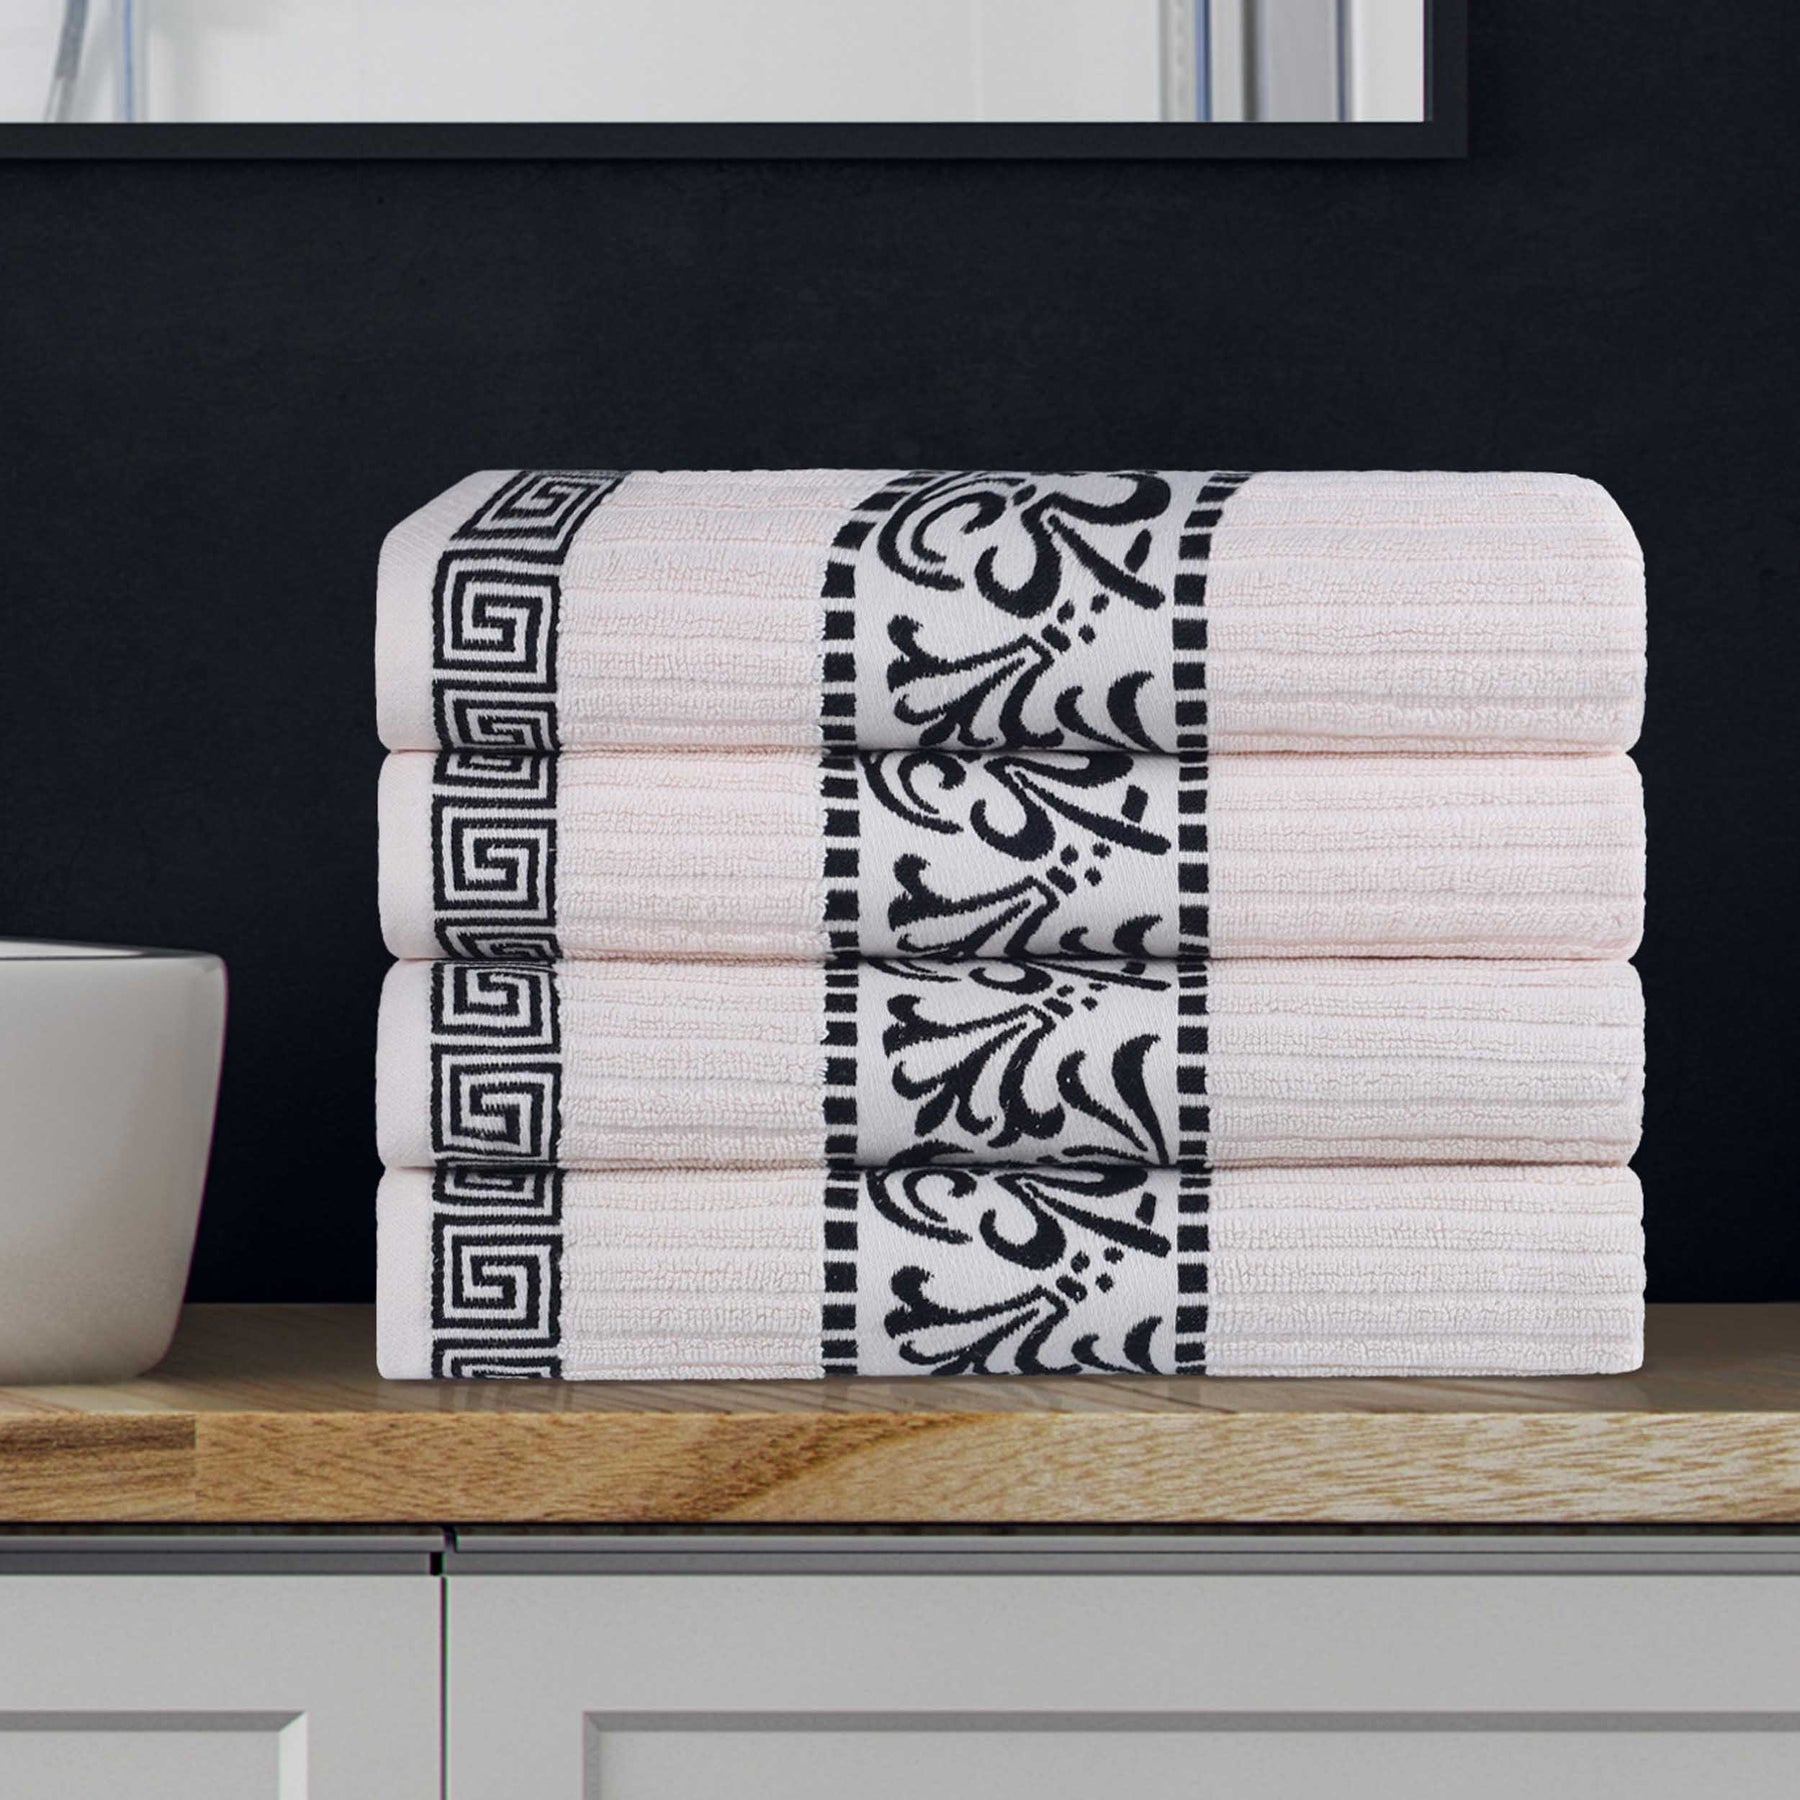 Superior Athens Cotton 4-Piece Bath Towel Set with Greek Scroll and Floral Pattern - Black